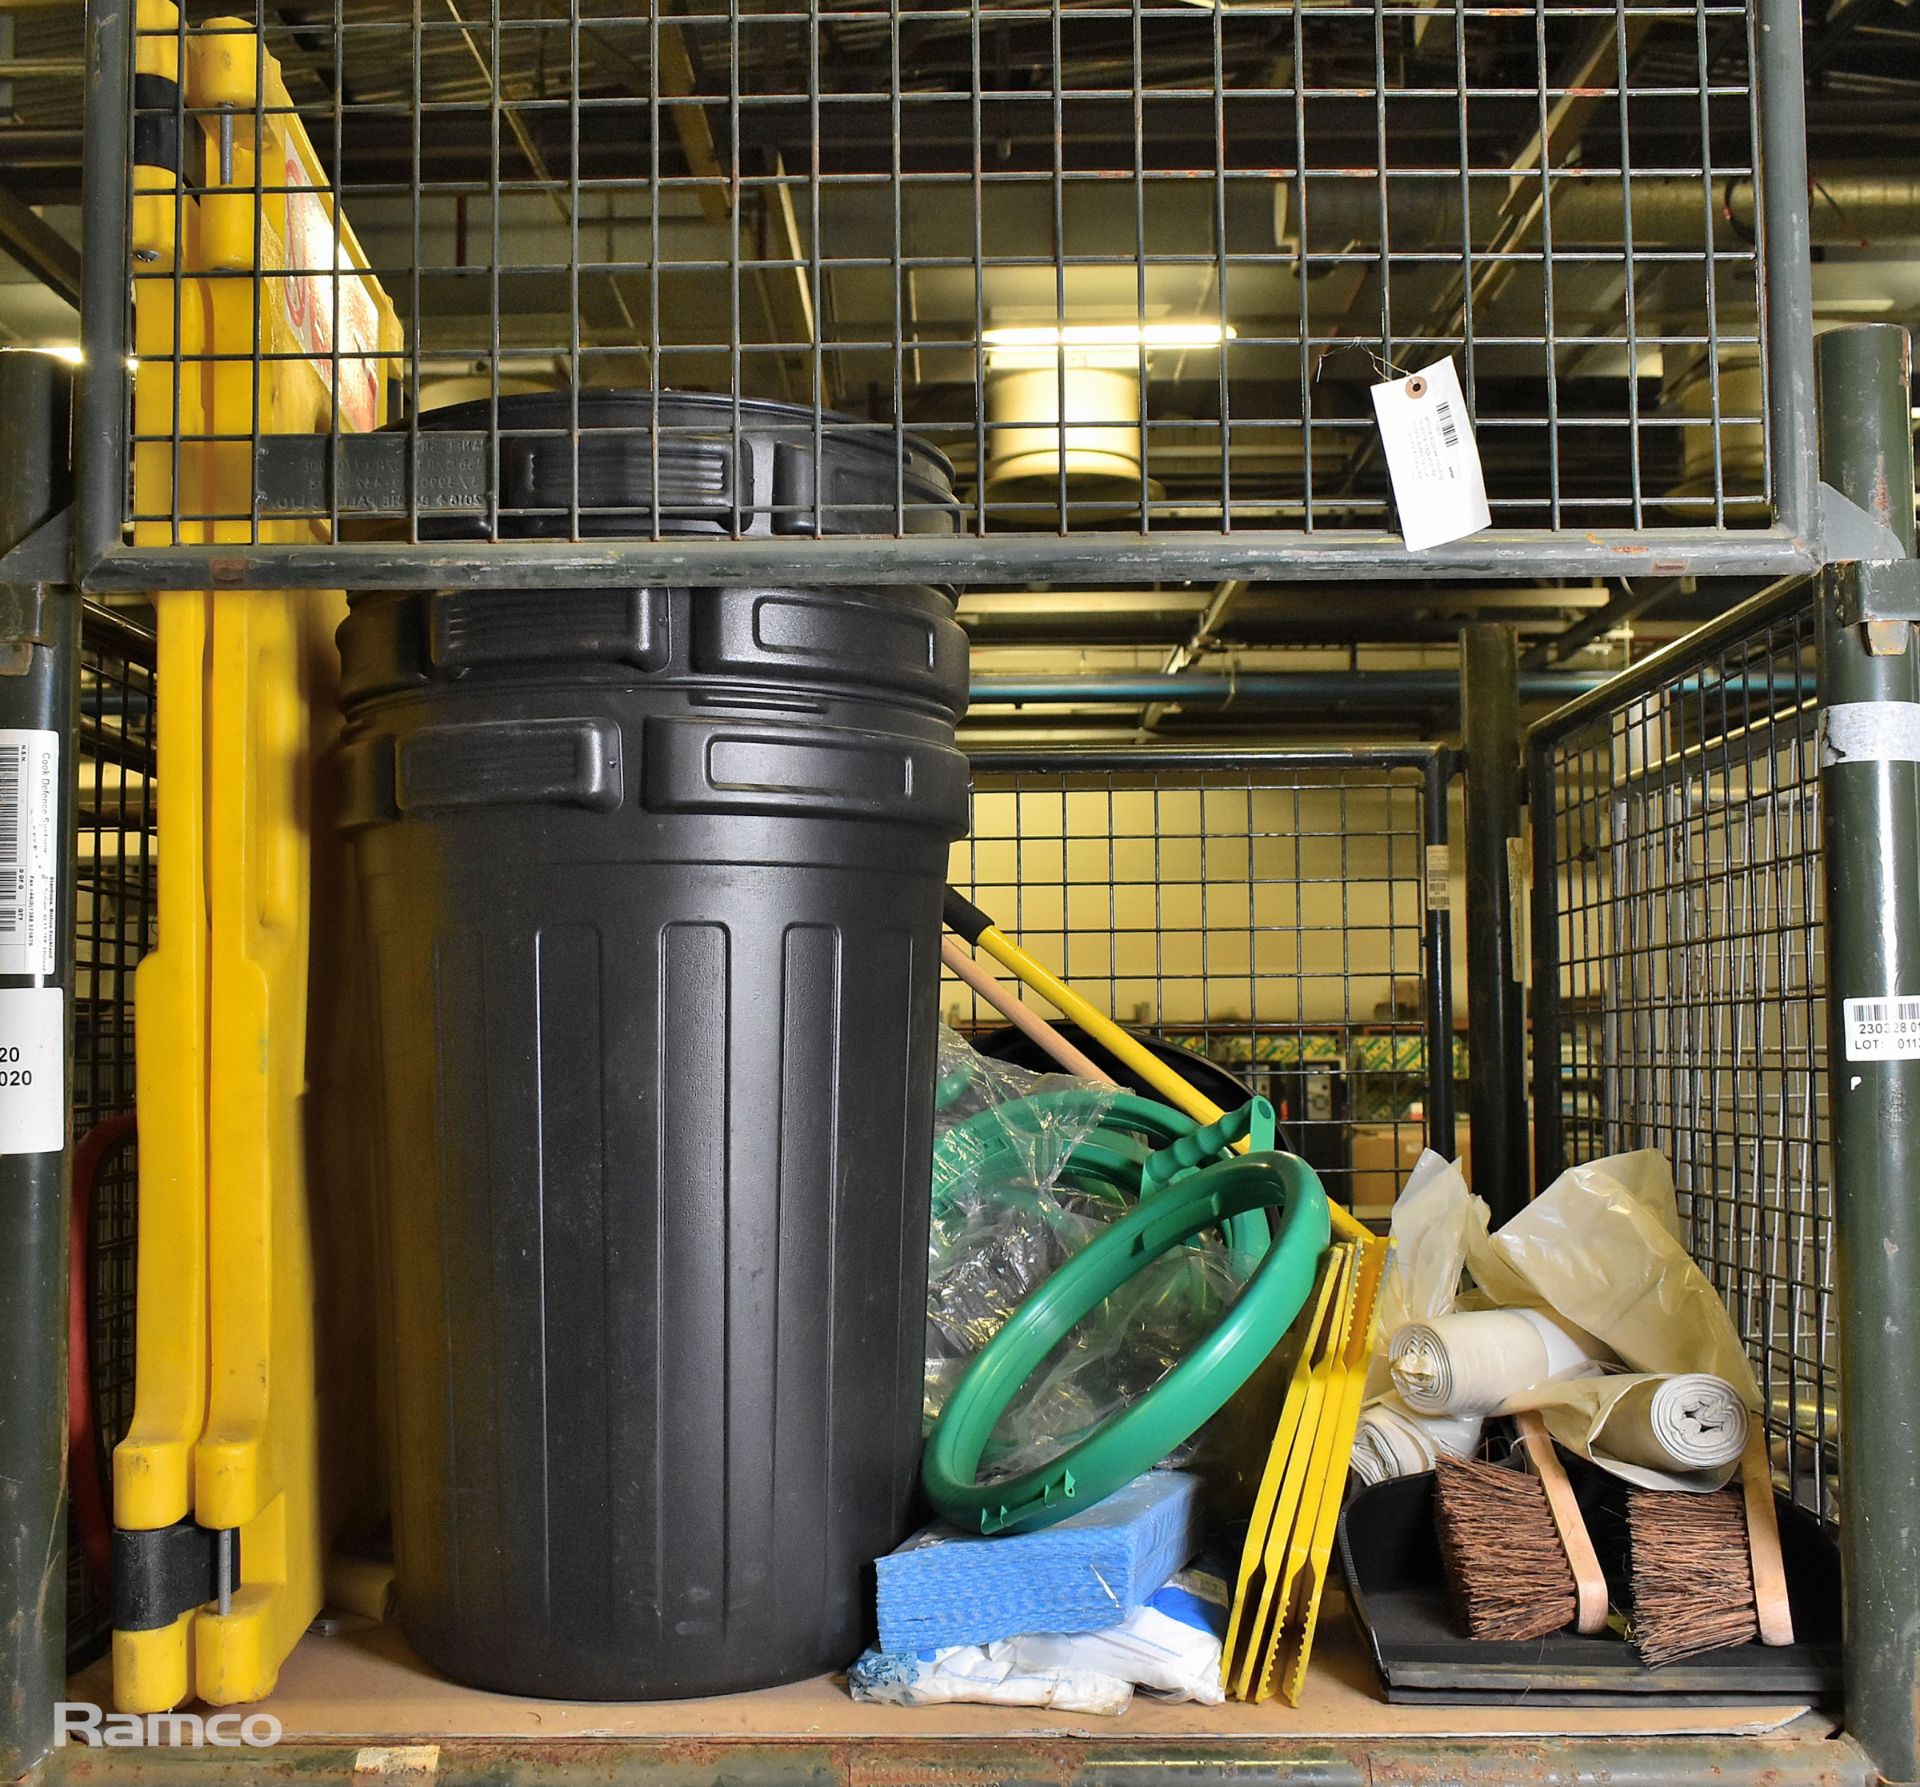 Janitorial supplies - dustbins, bags, litter pickers, sweeping brush, dustpans, signage